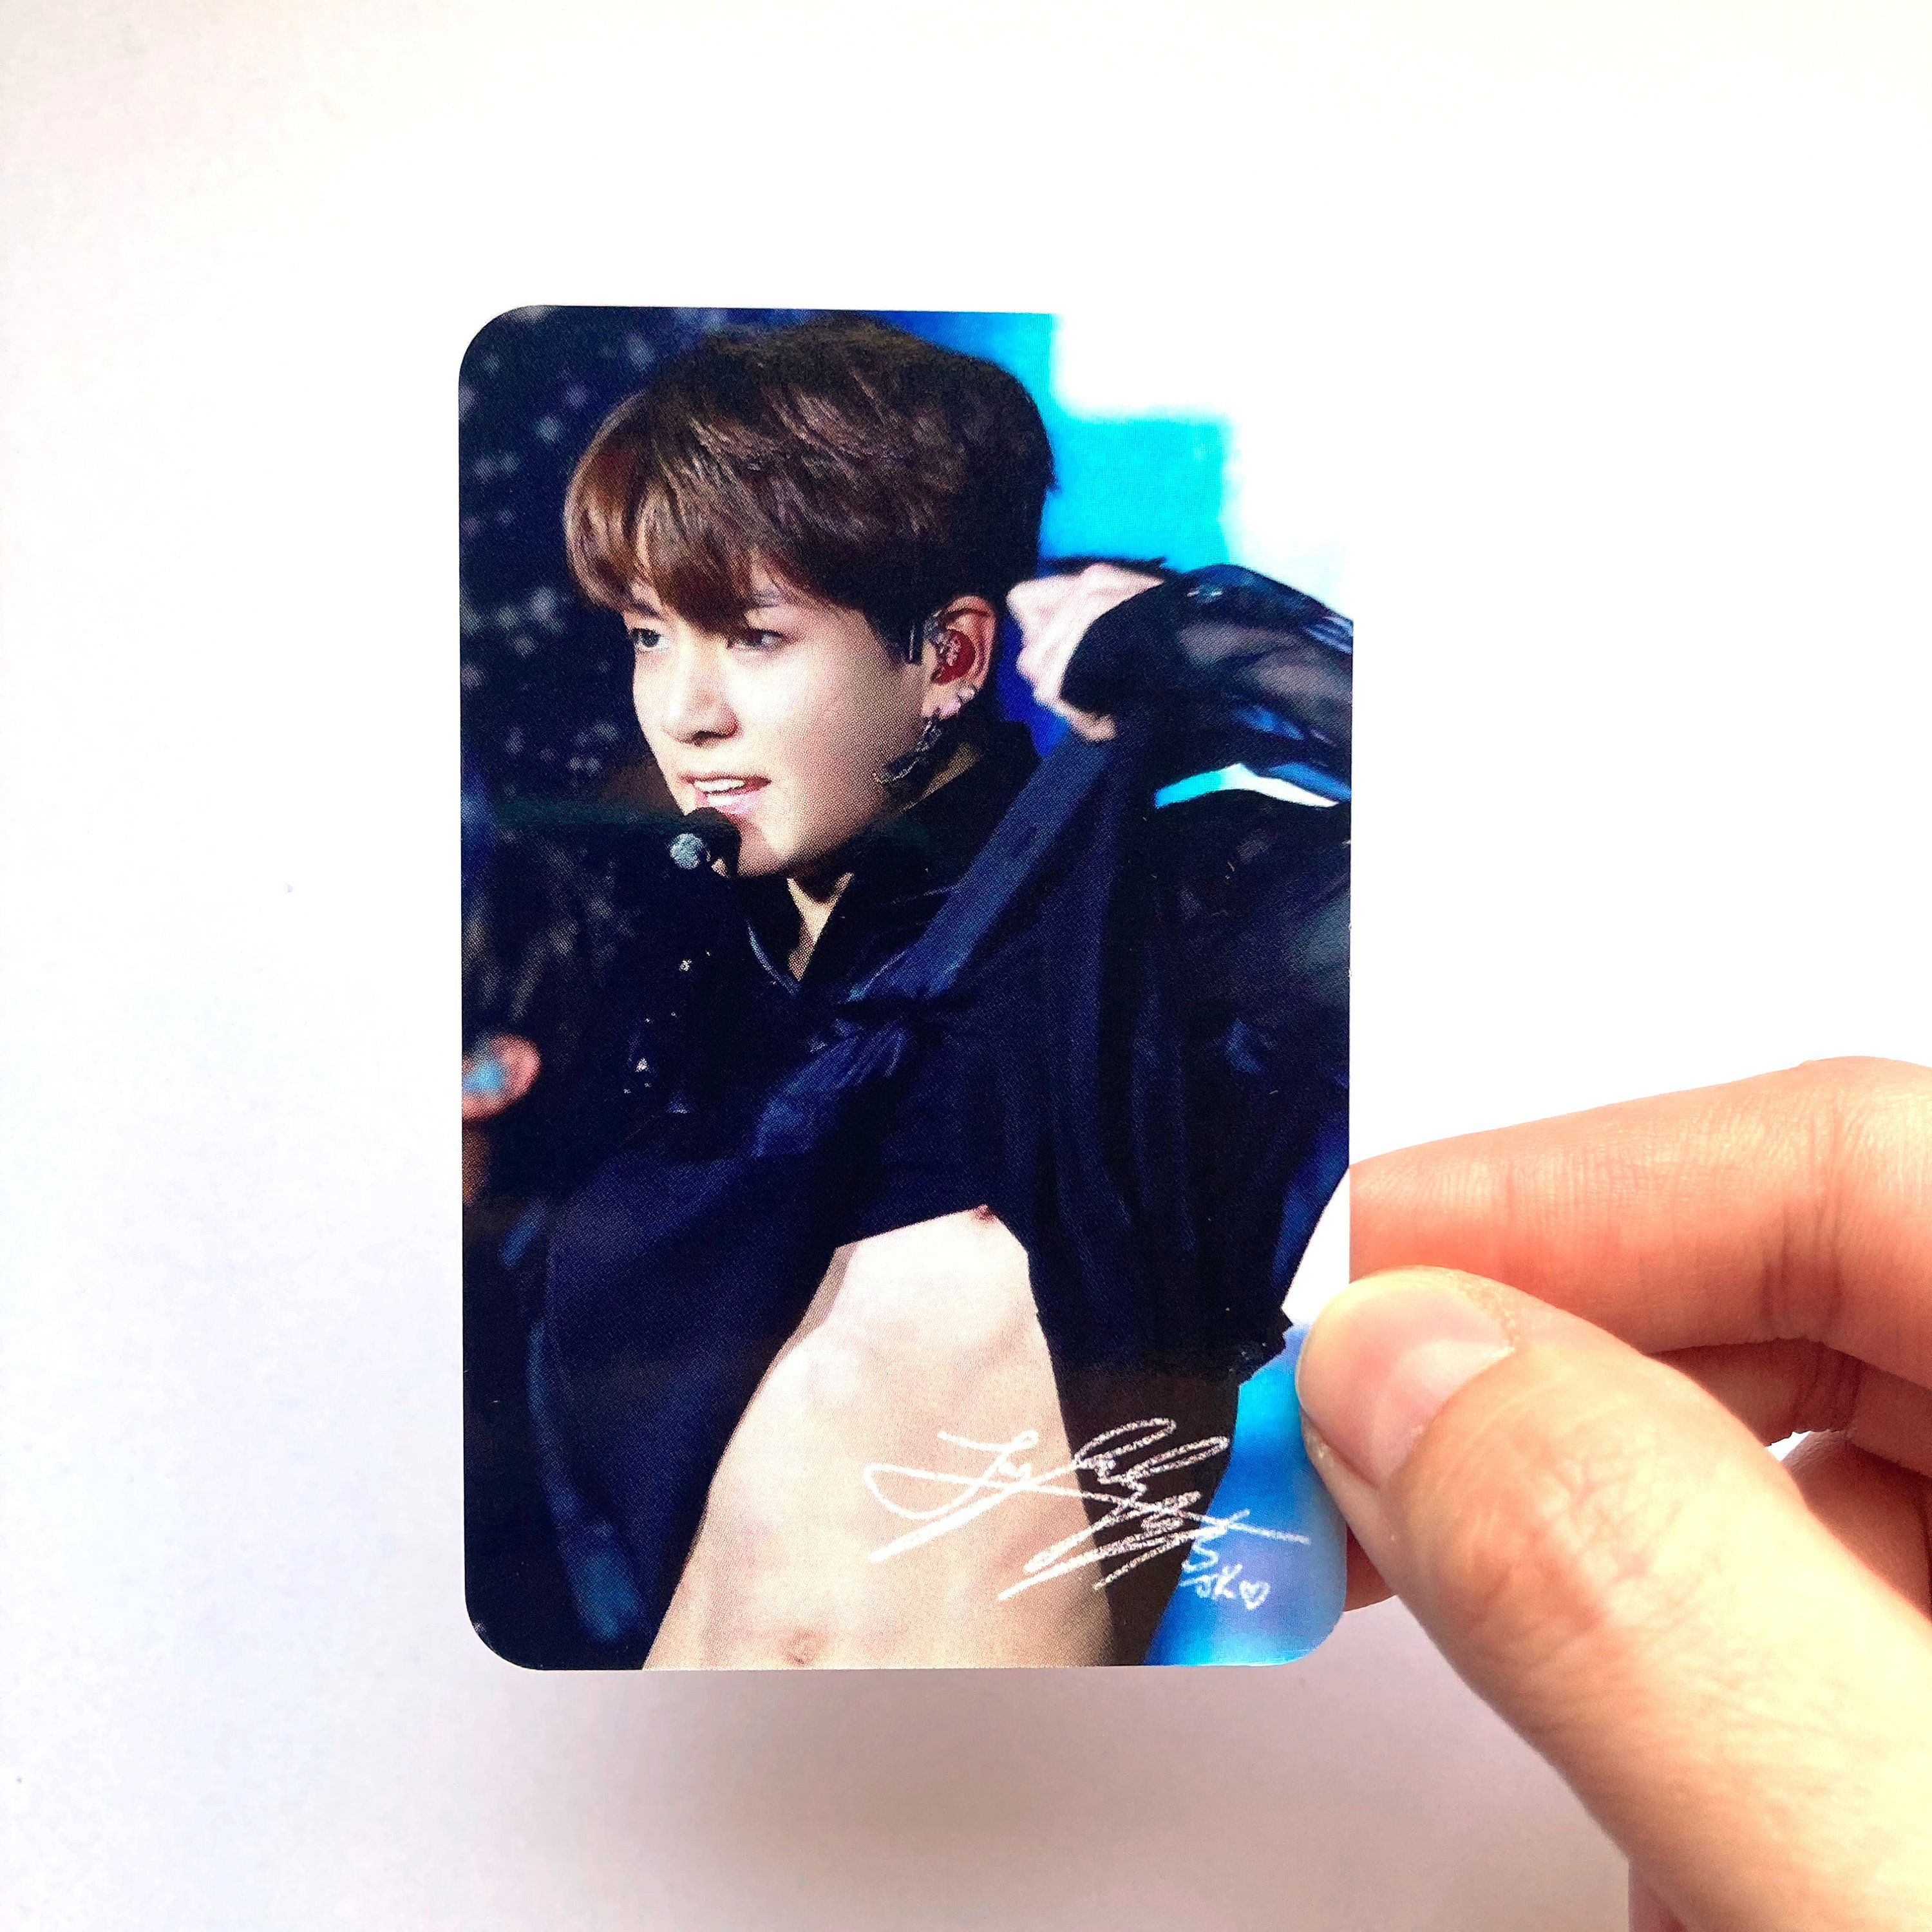 Say goodbye to these fakes! #Kpop #photocards #fake #real #bts #jin #s